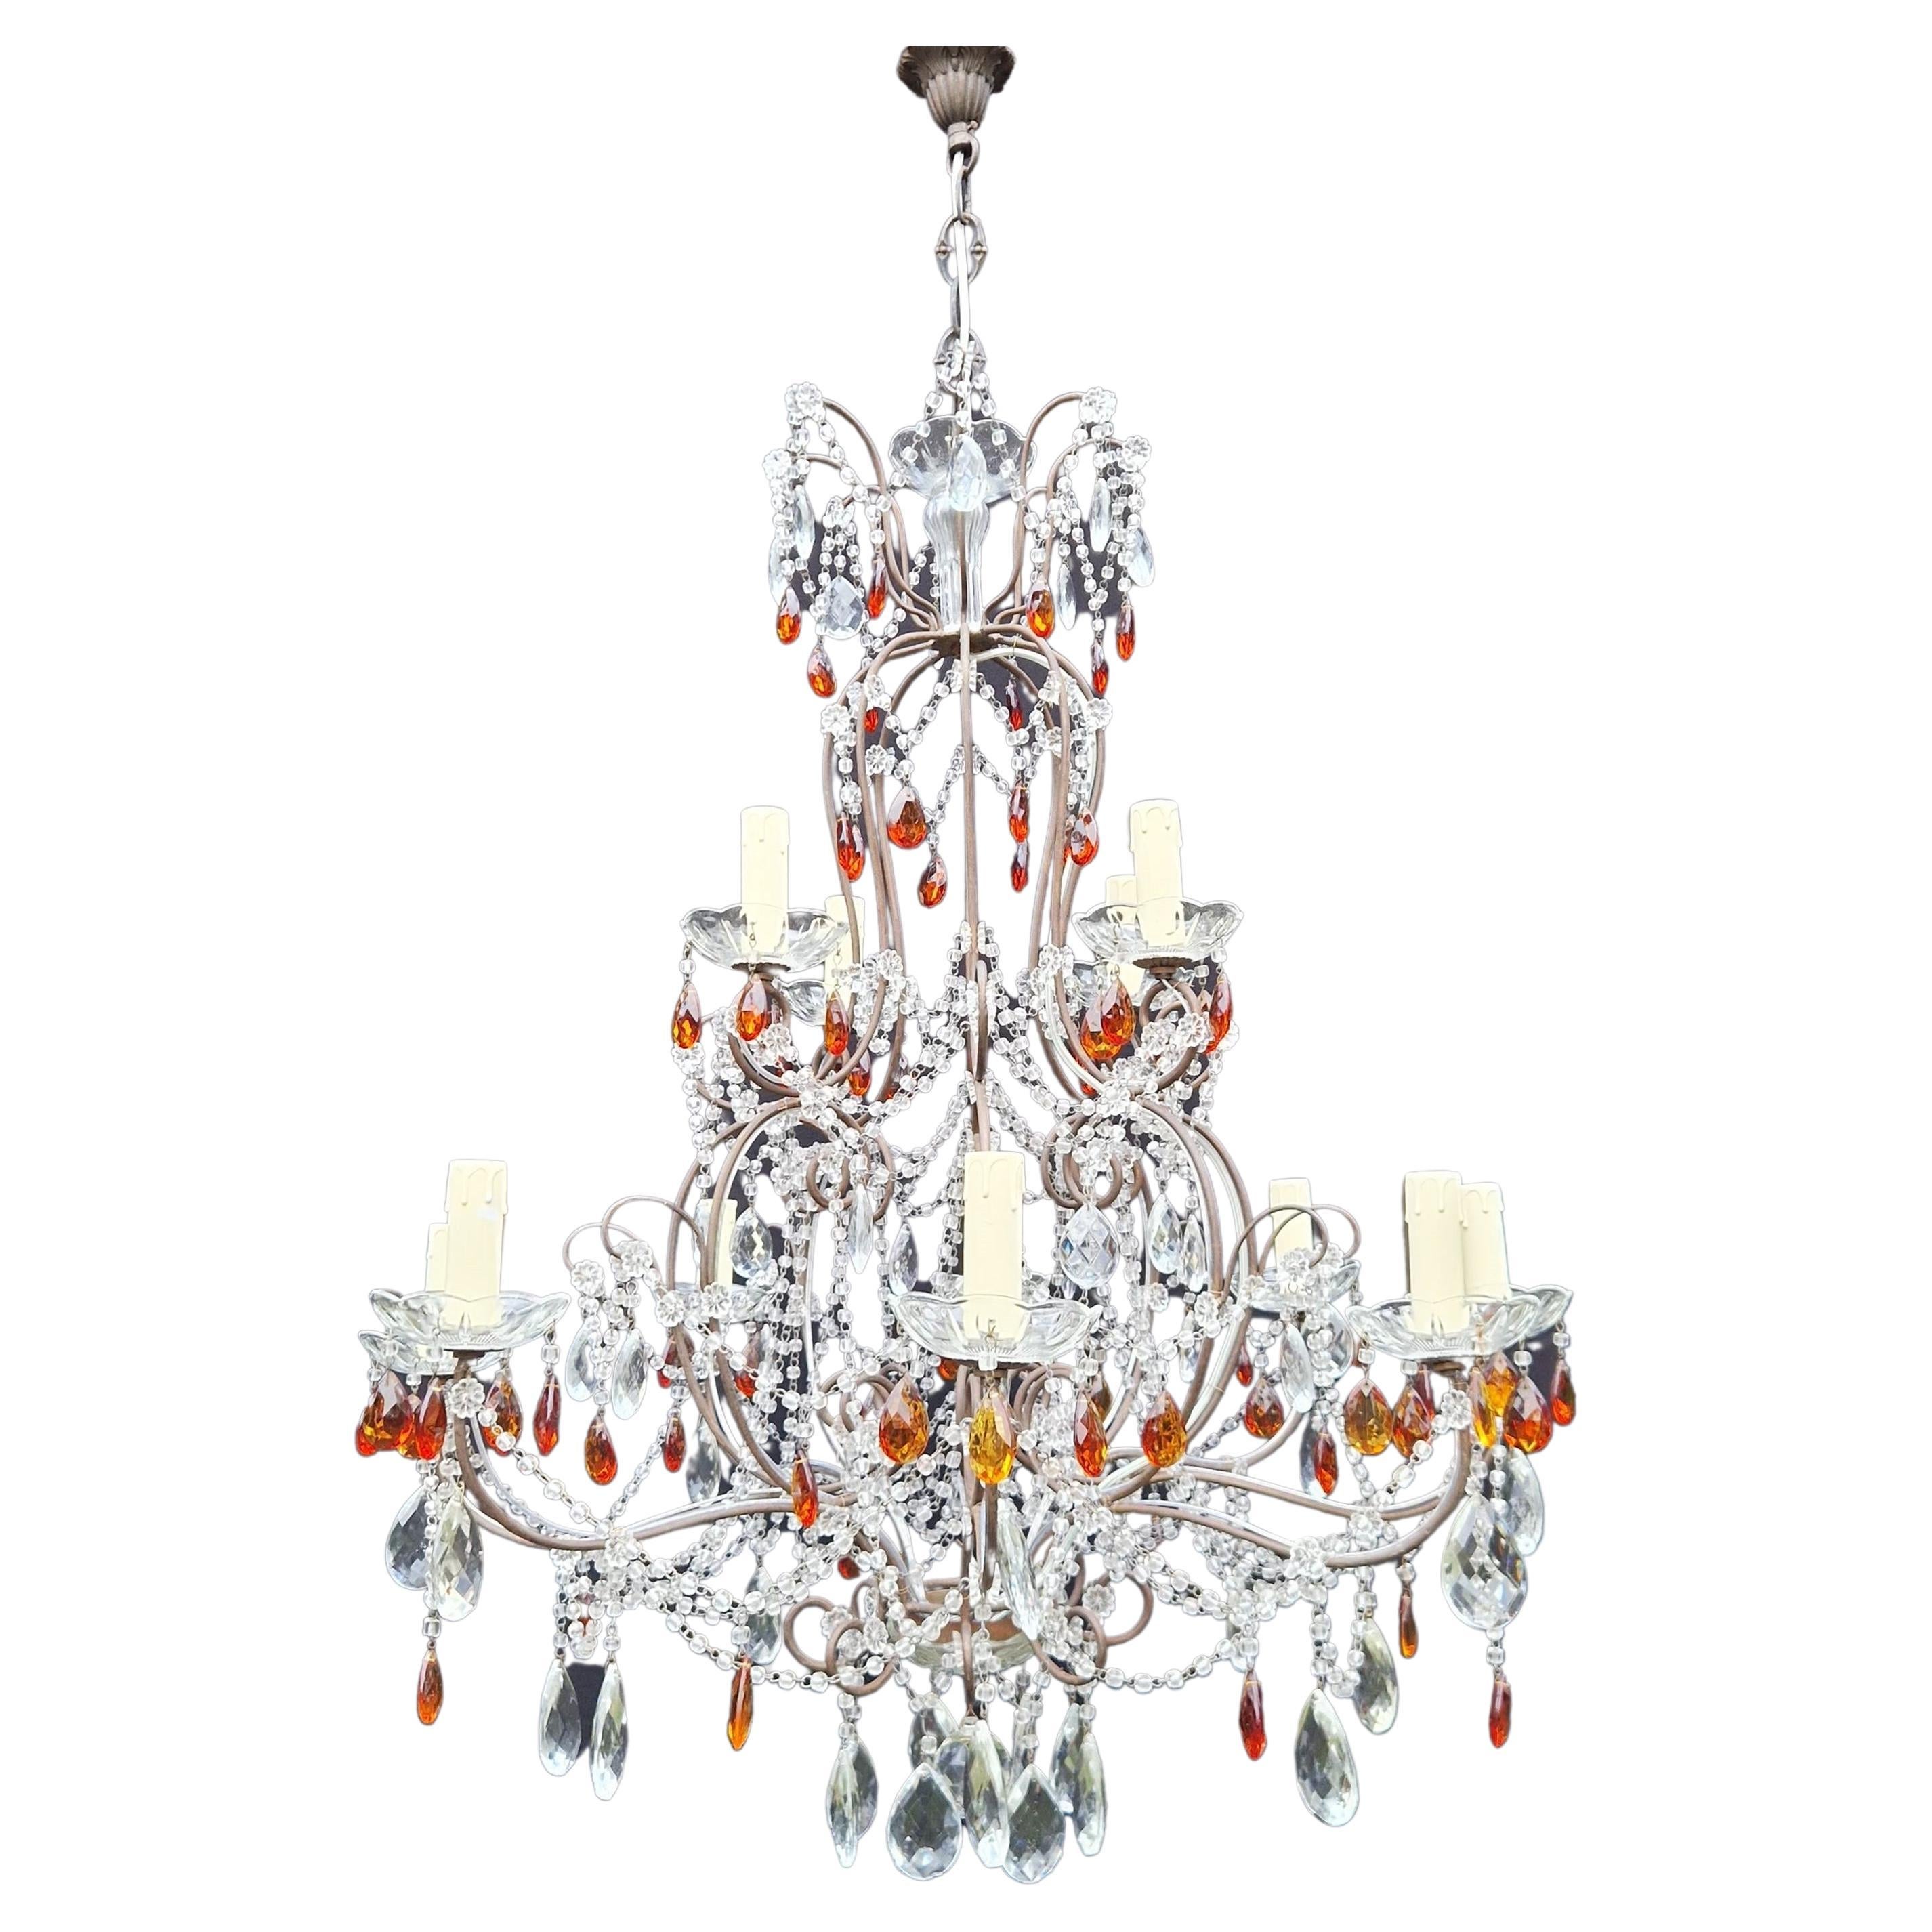 Presenting our cherished old chandelier, lovingly and professionally restored in Berlin. Its electrical wiring is compatible with the US, having been re-wired and prepared for easy hanging. Not a single crystal is missing, as the cabling has been